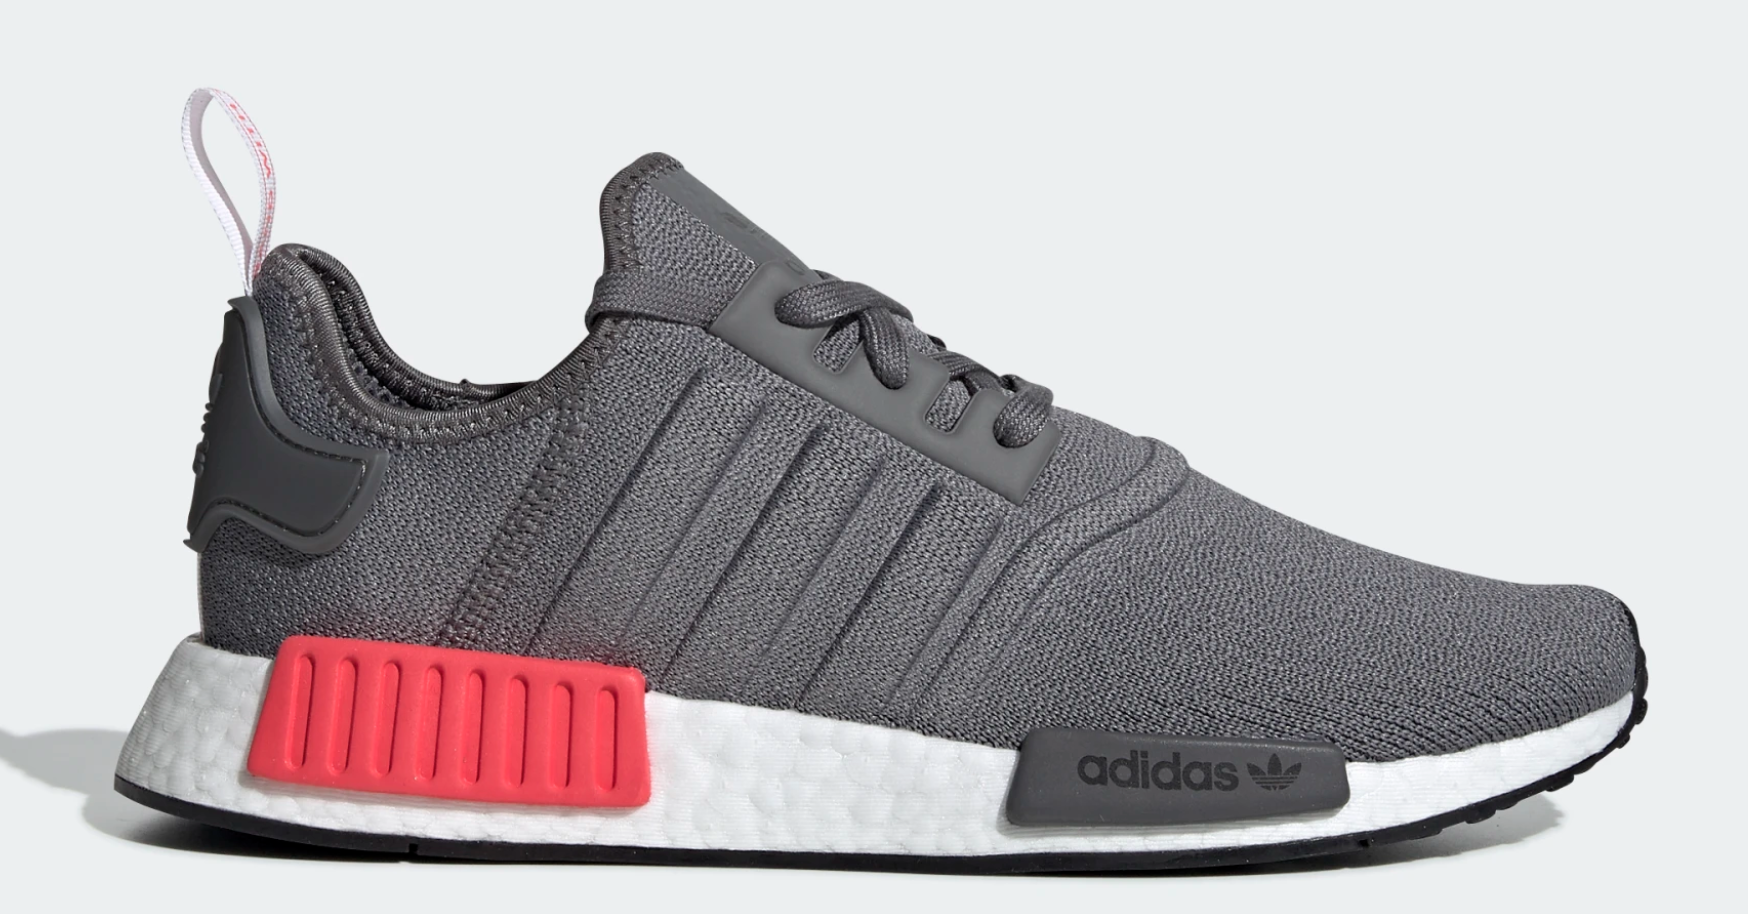 Adidas NMD Releases | New Adidas Shoes 2018